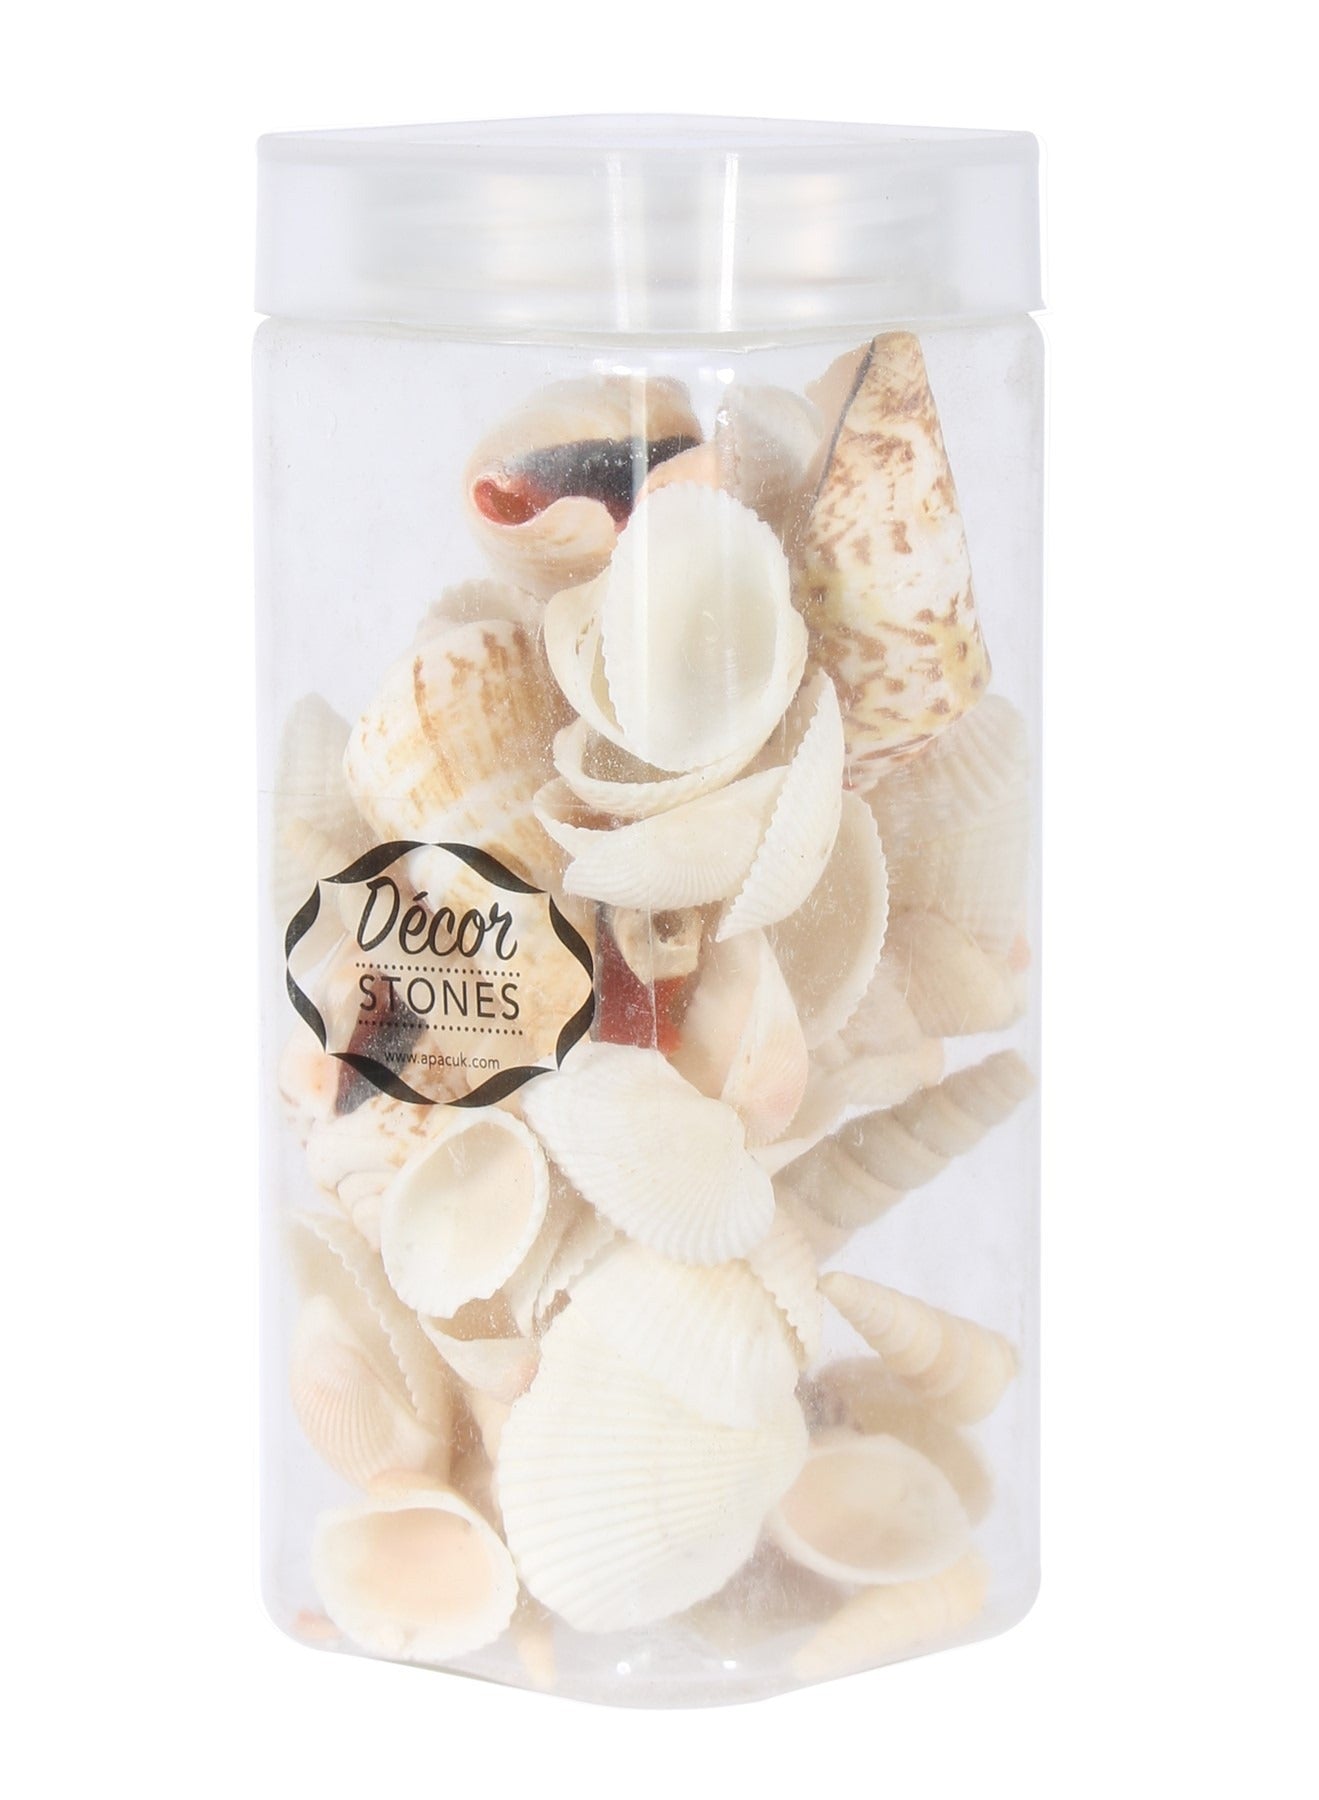 View Mixed Sea Shells in Jar information